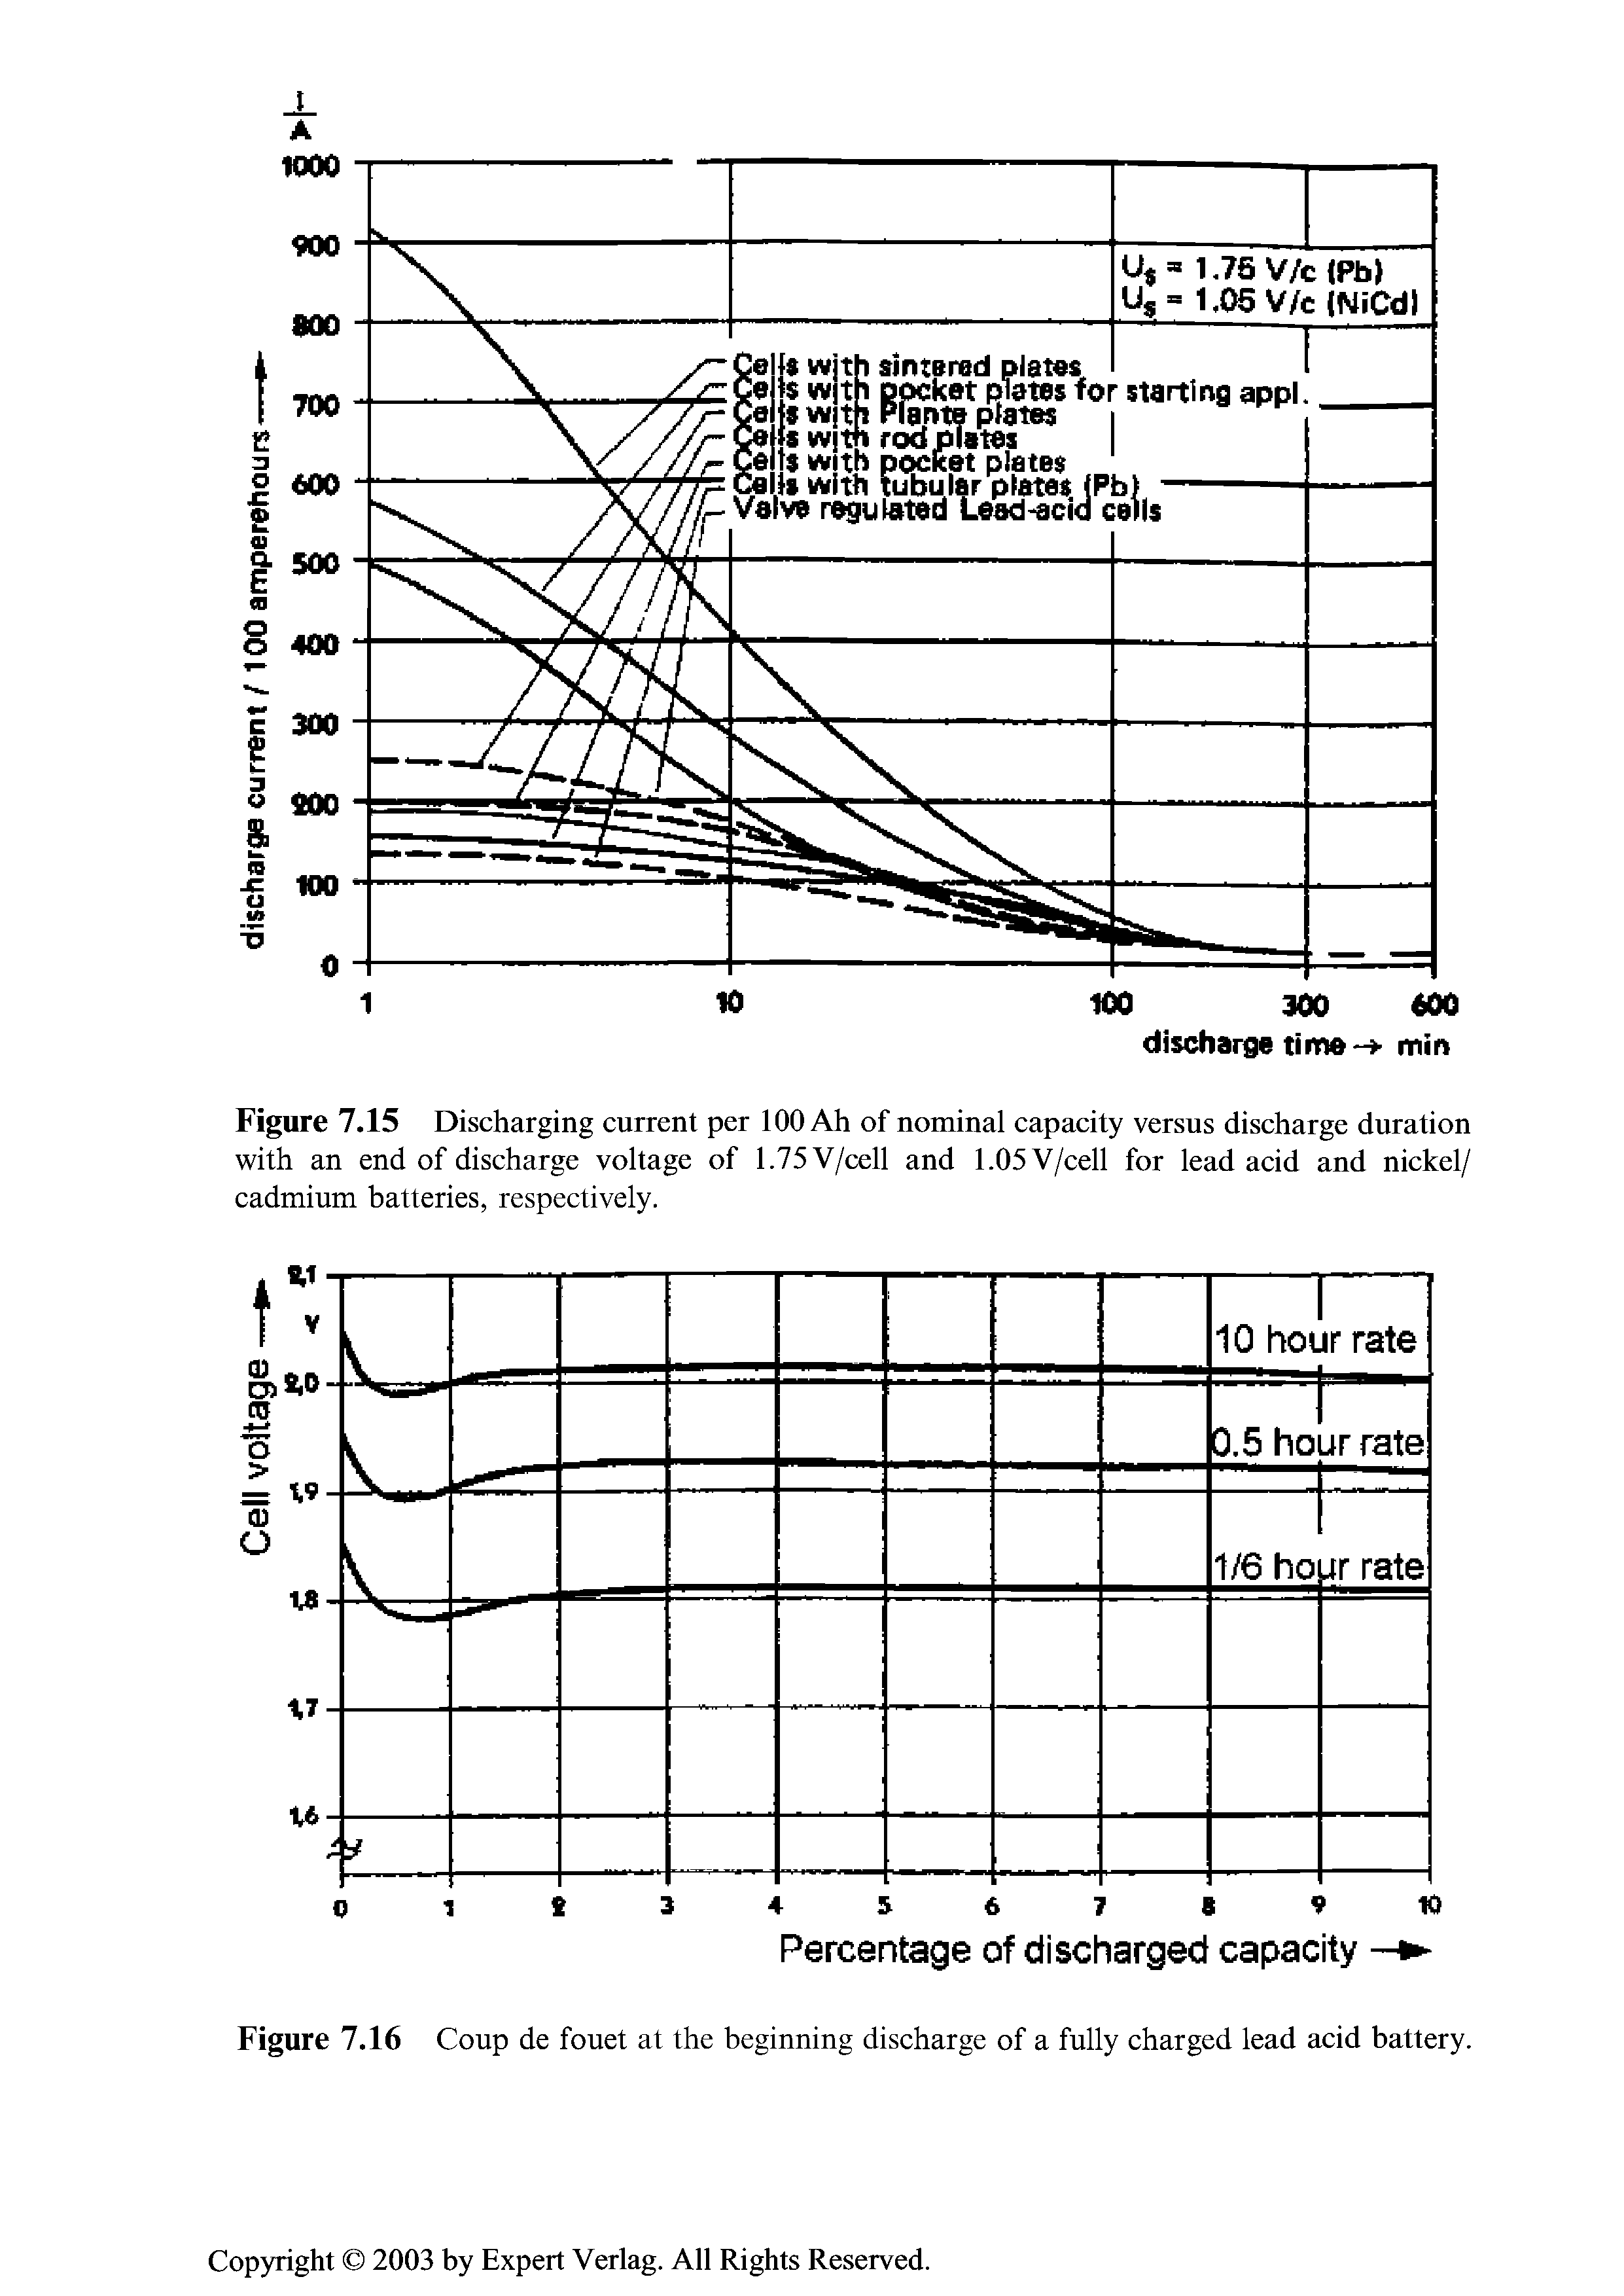 Figure 7.16 Coup de fouet at the beginning discharge of a fully charged lead acid battery.